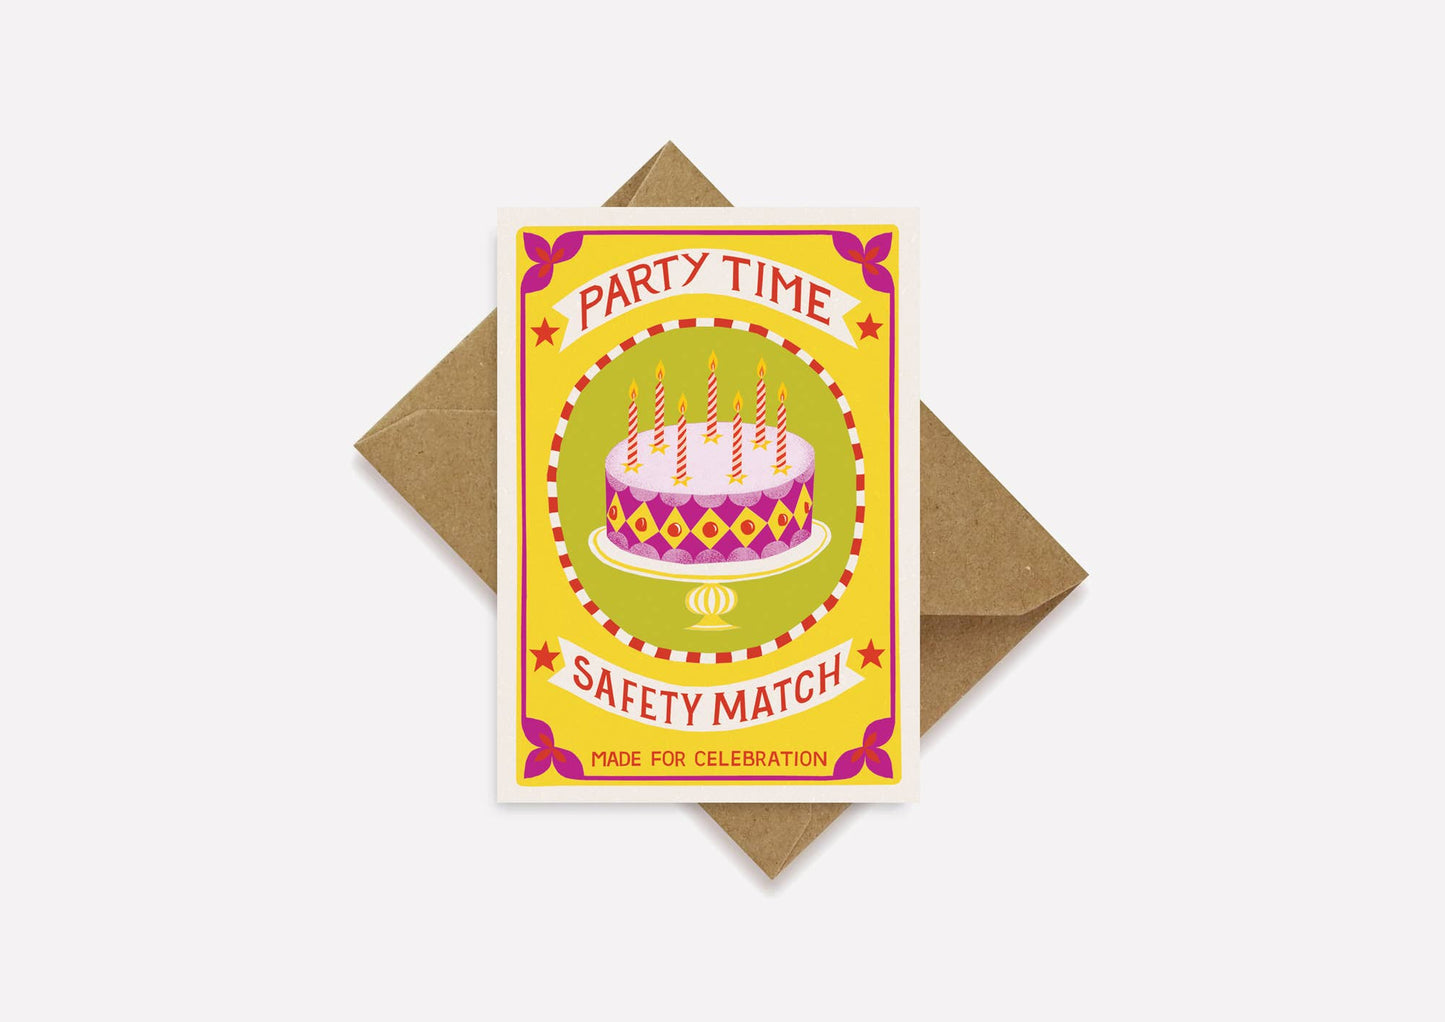 Party Time mini greetings card